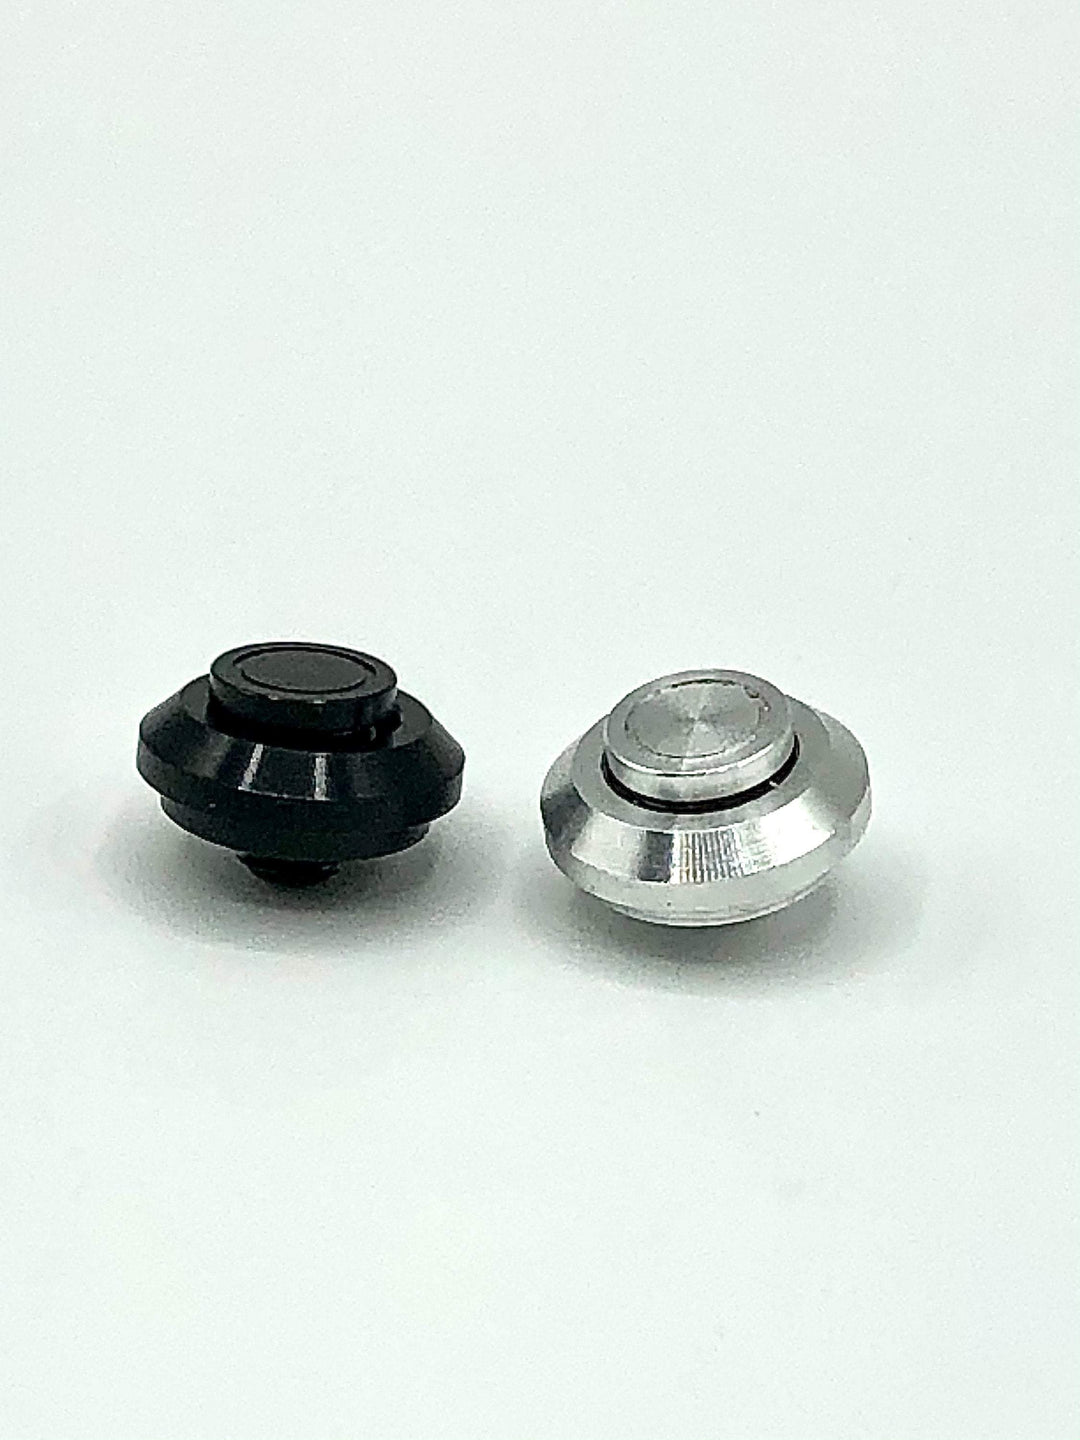 12mm Switch Plungers - Saberbay